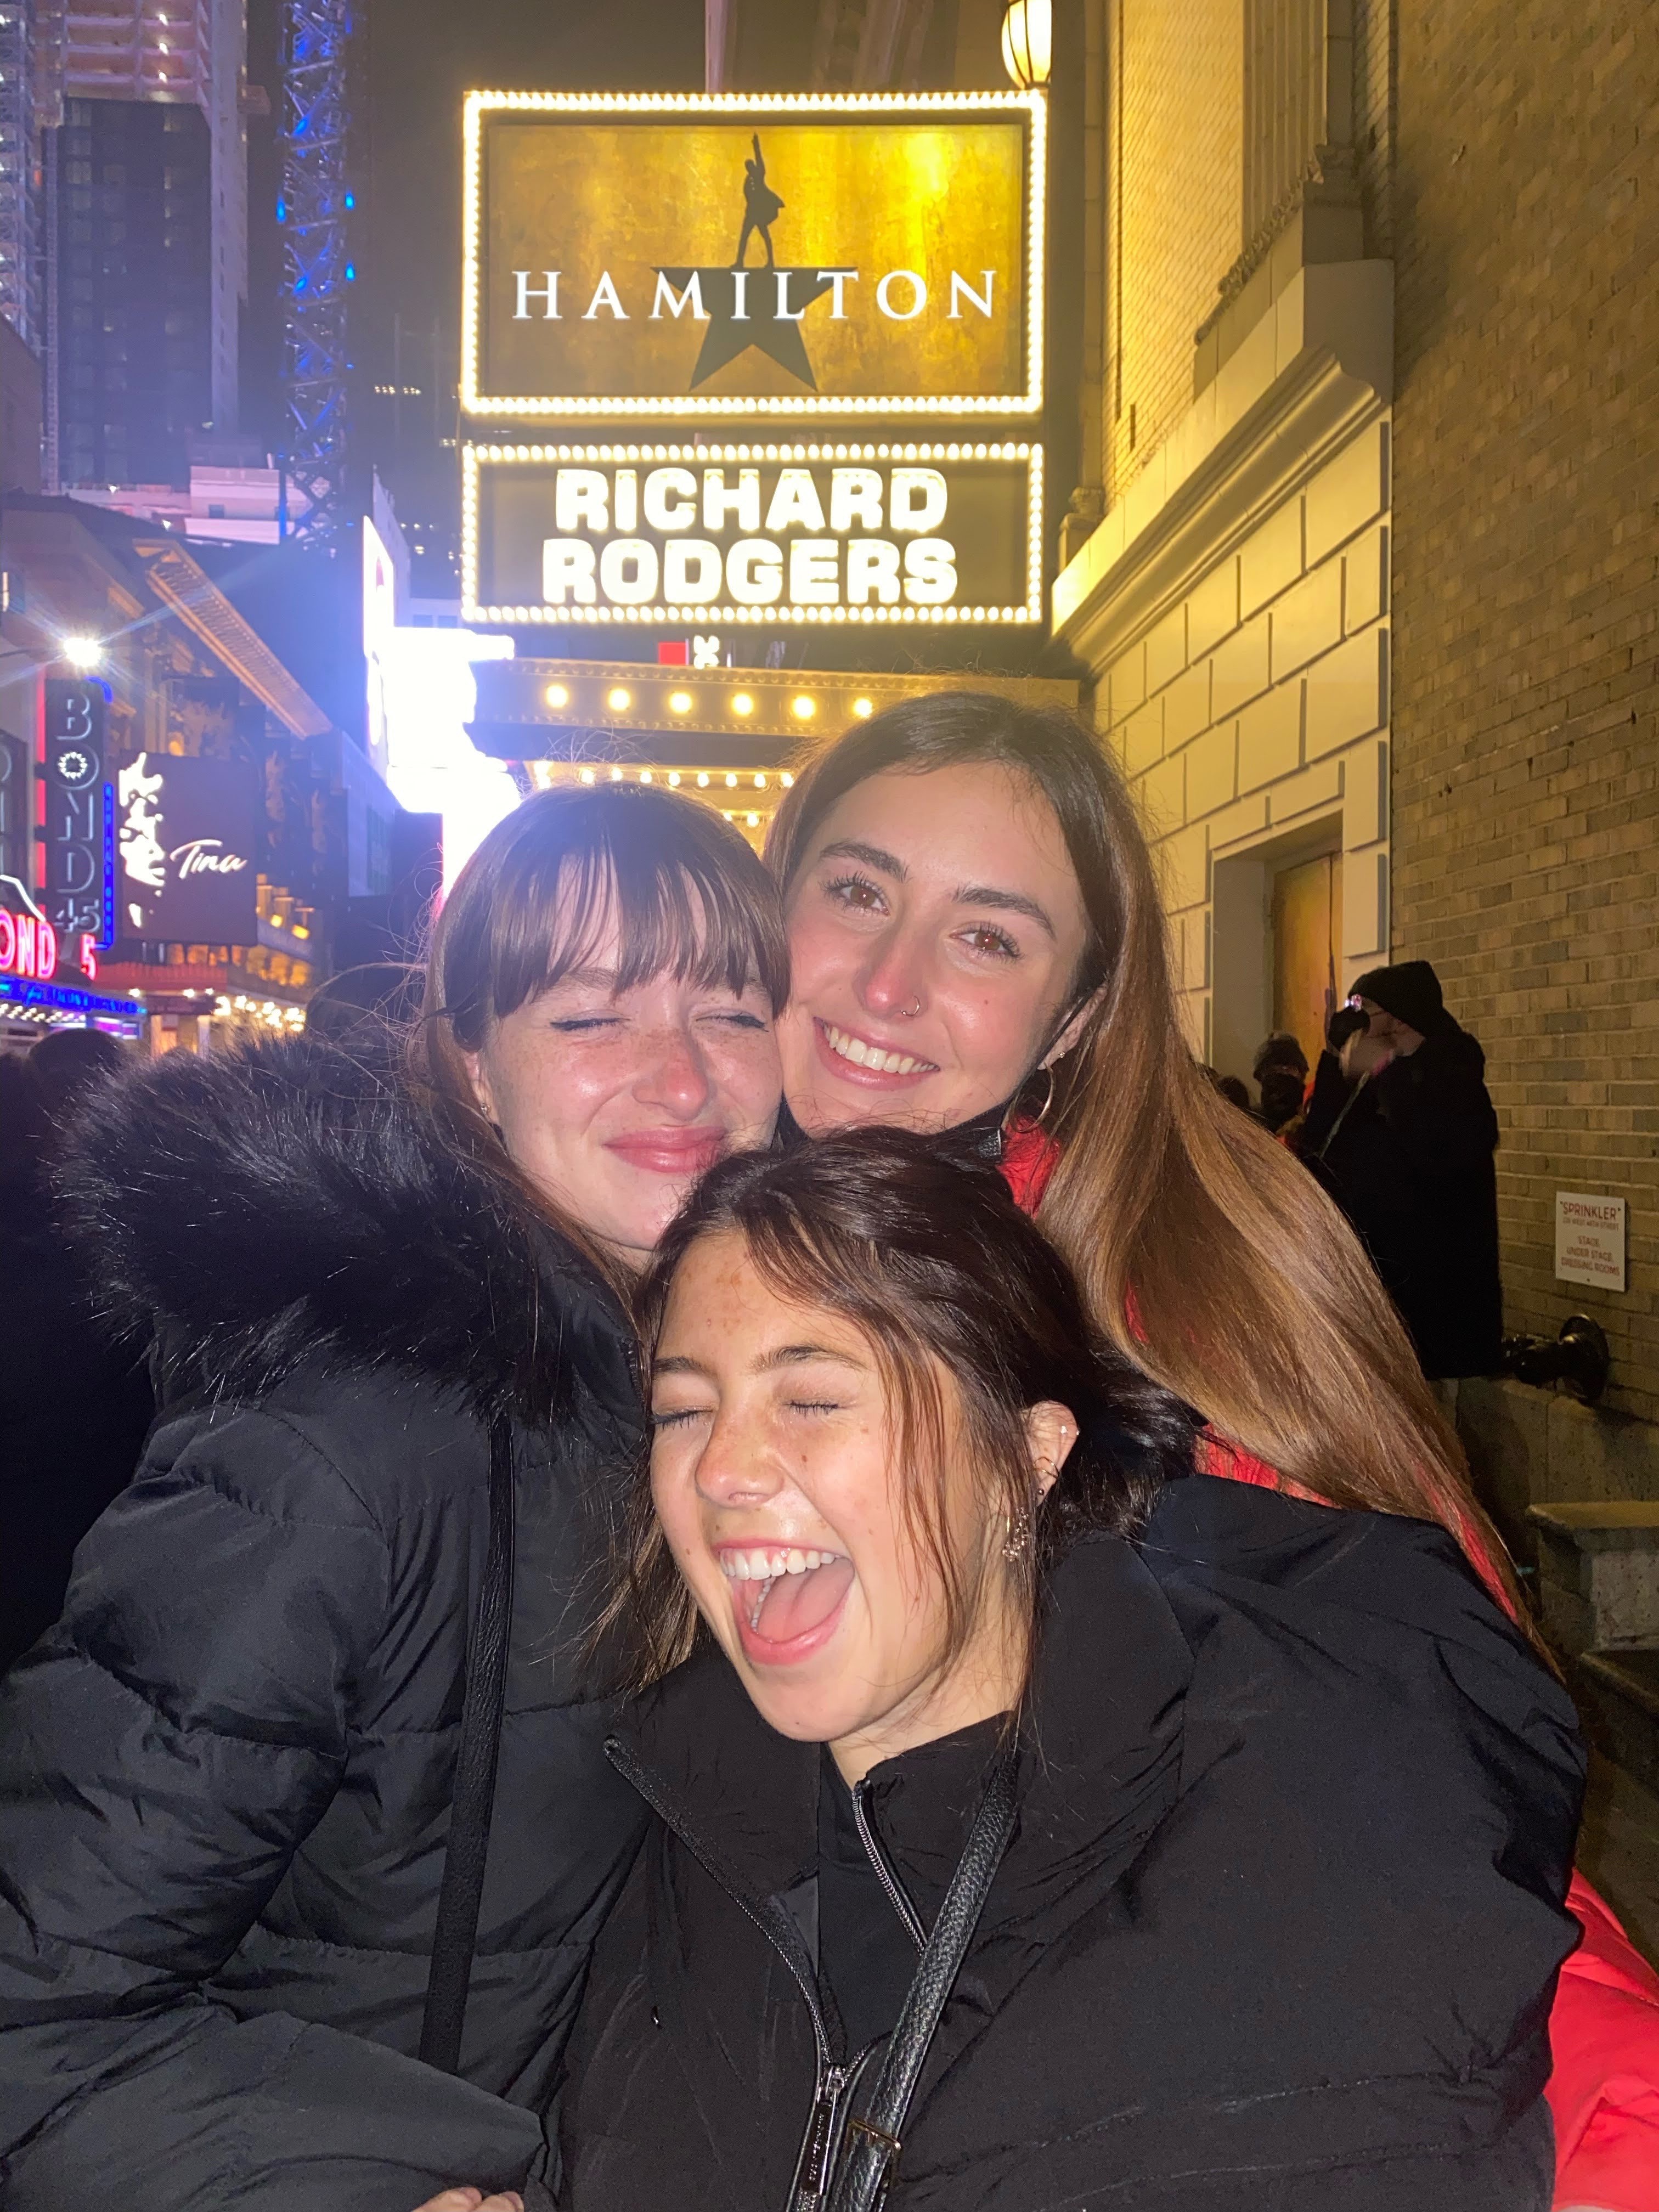 Belmont East students pose in fron of Broadway show Hamilton sign